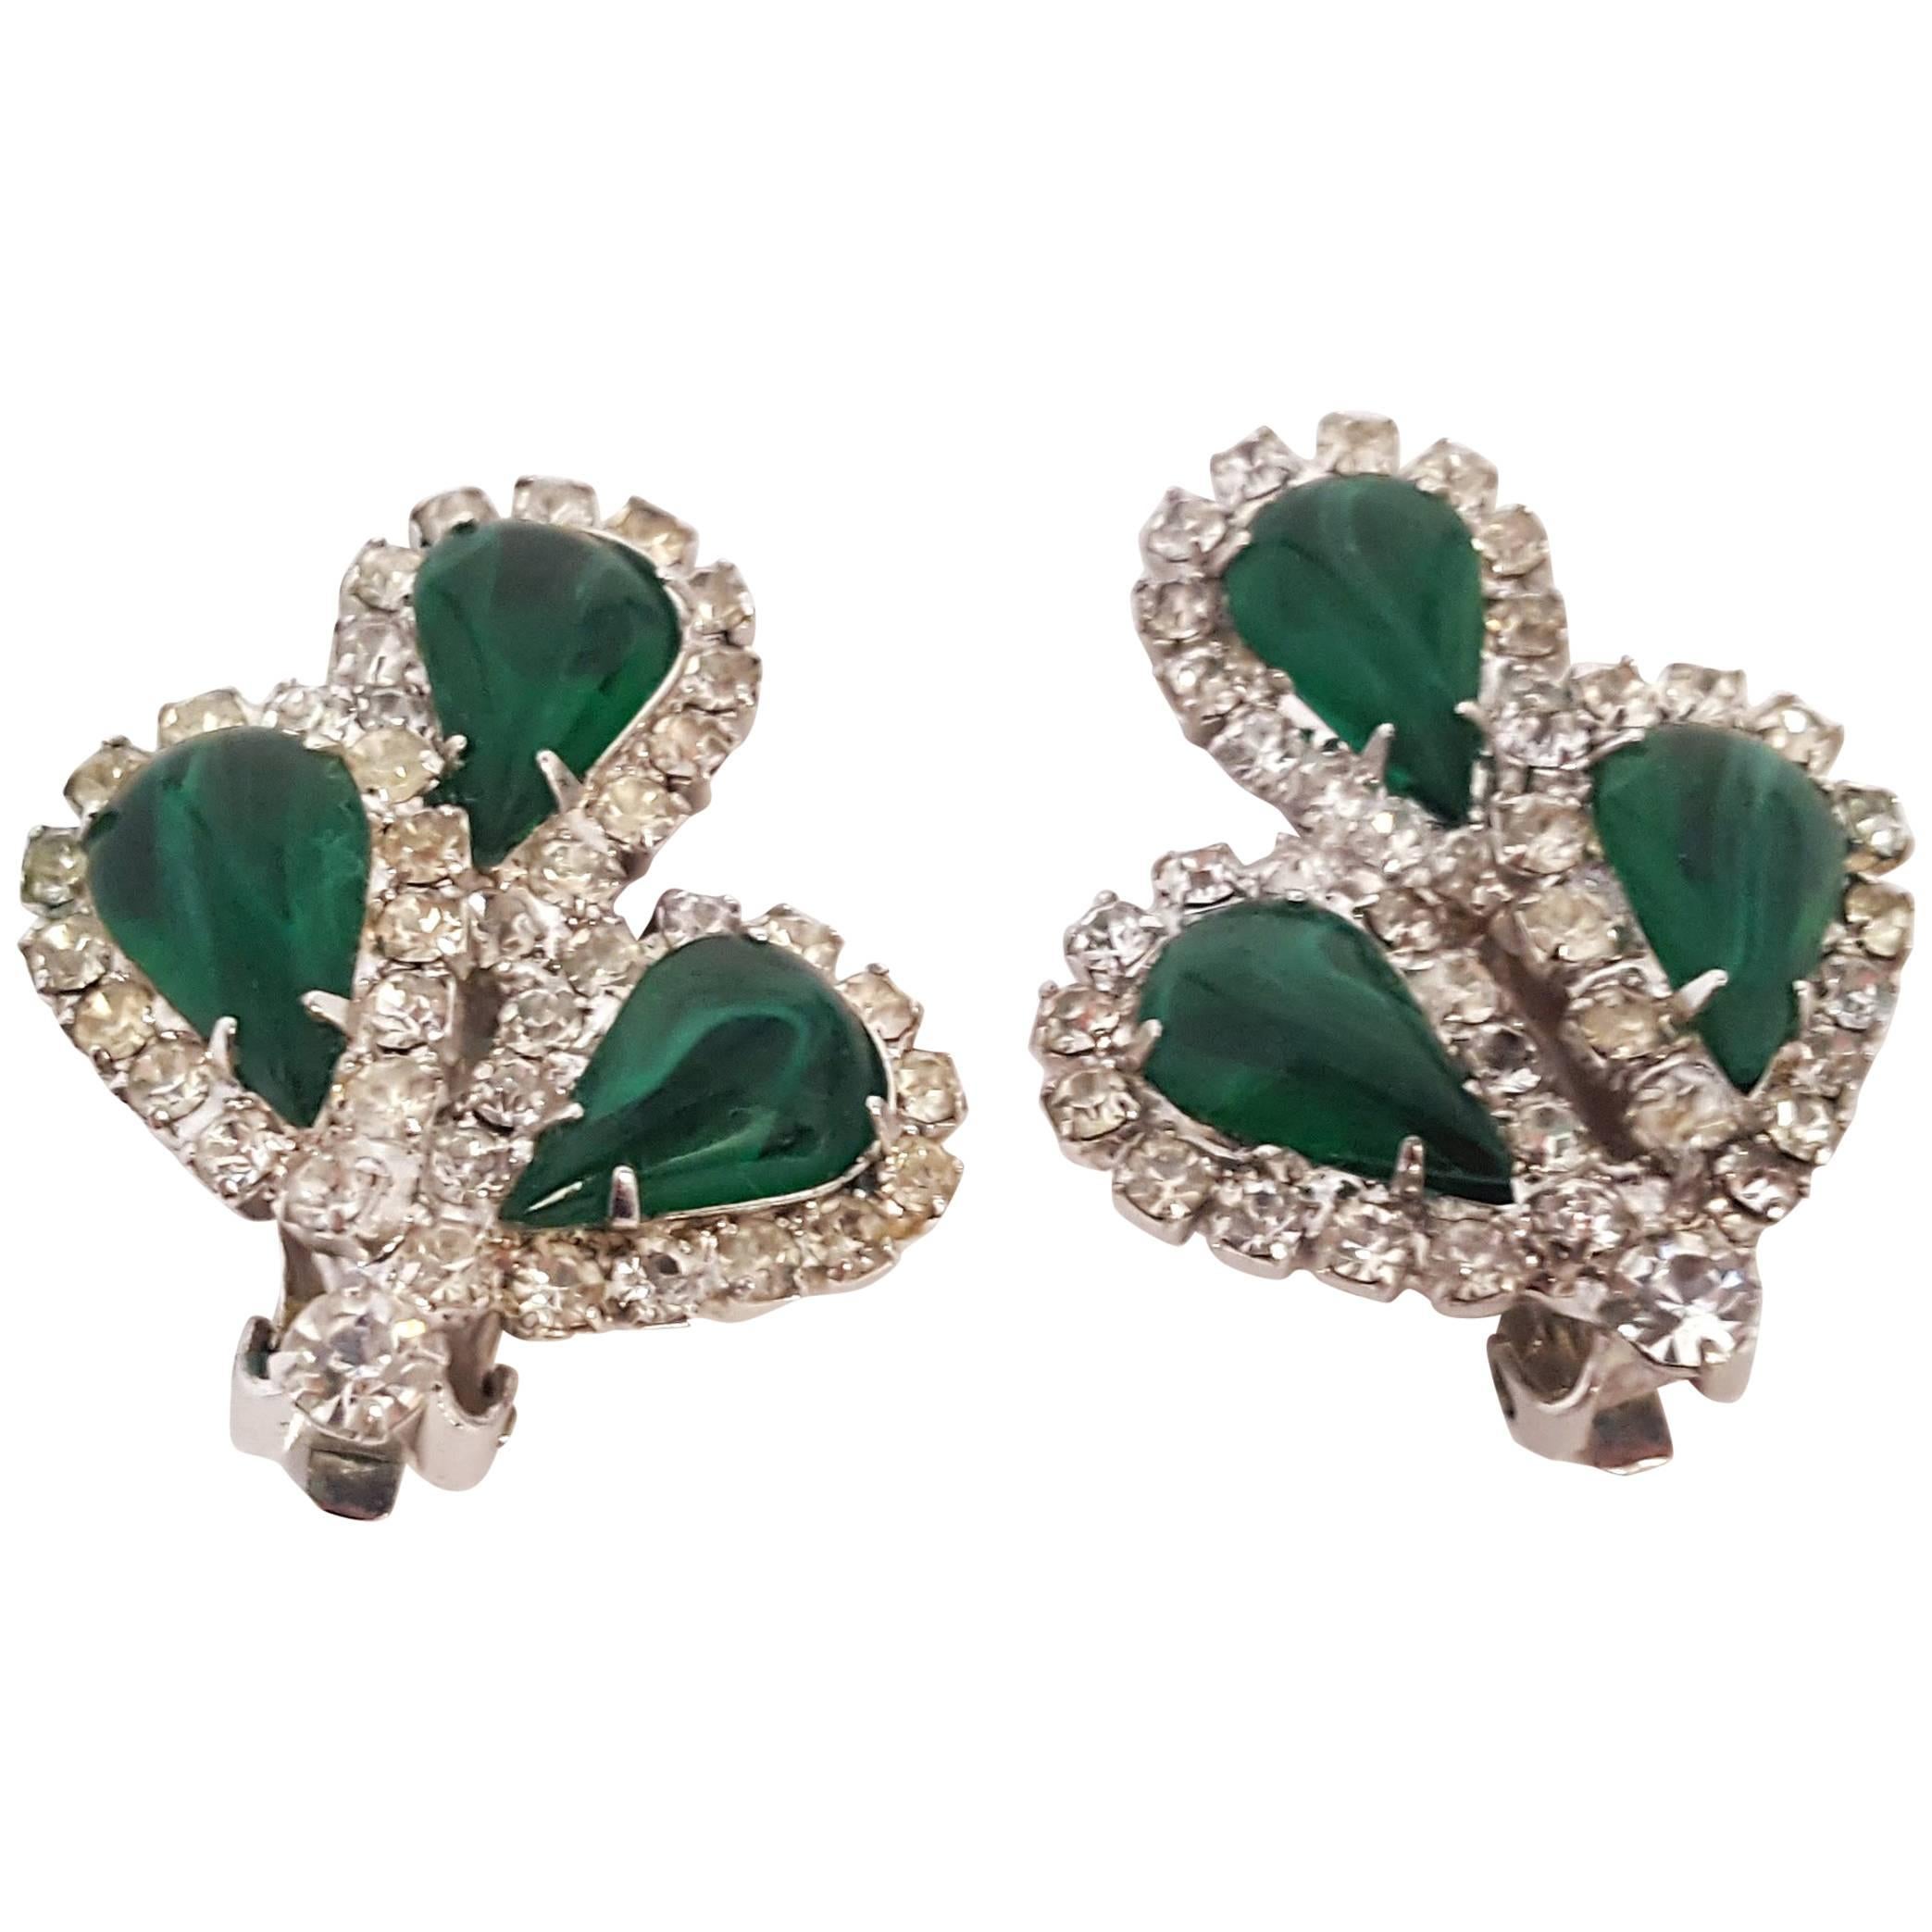 60s Weiss Rhinestone and Green Marbled Glass Earrings